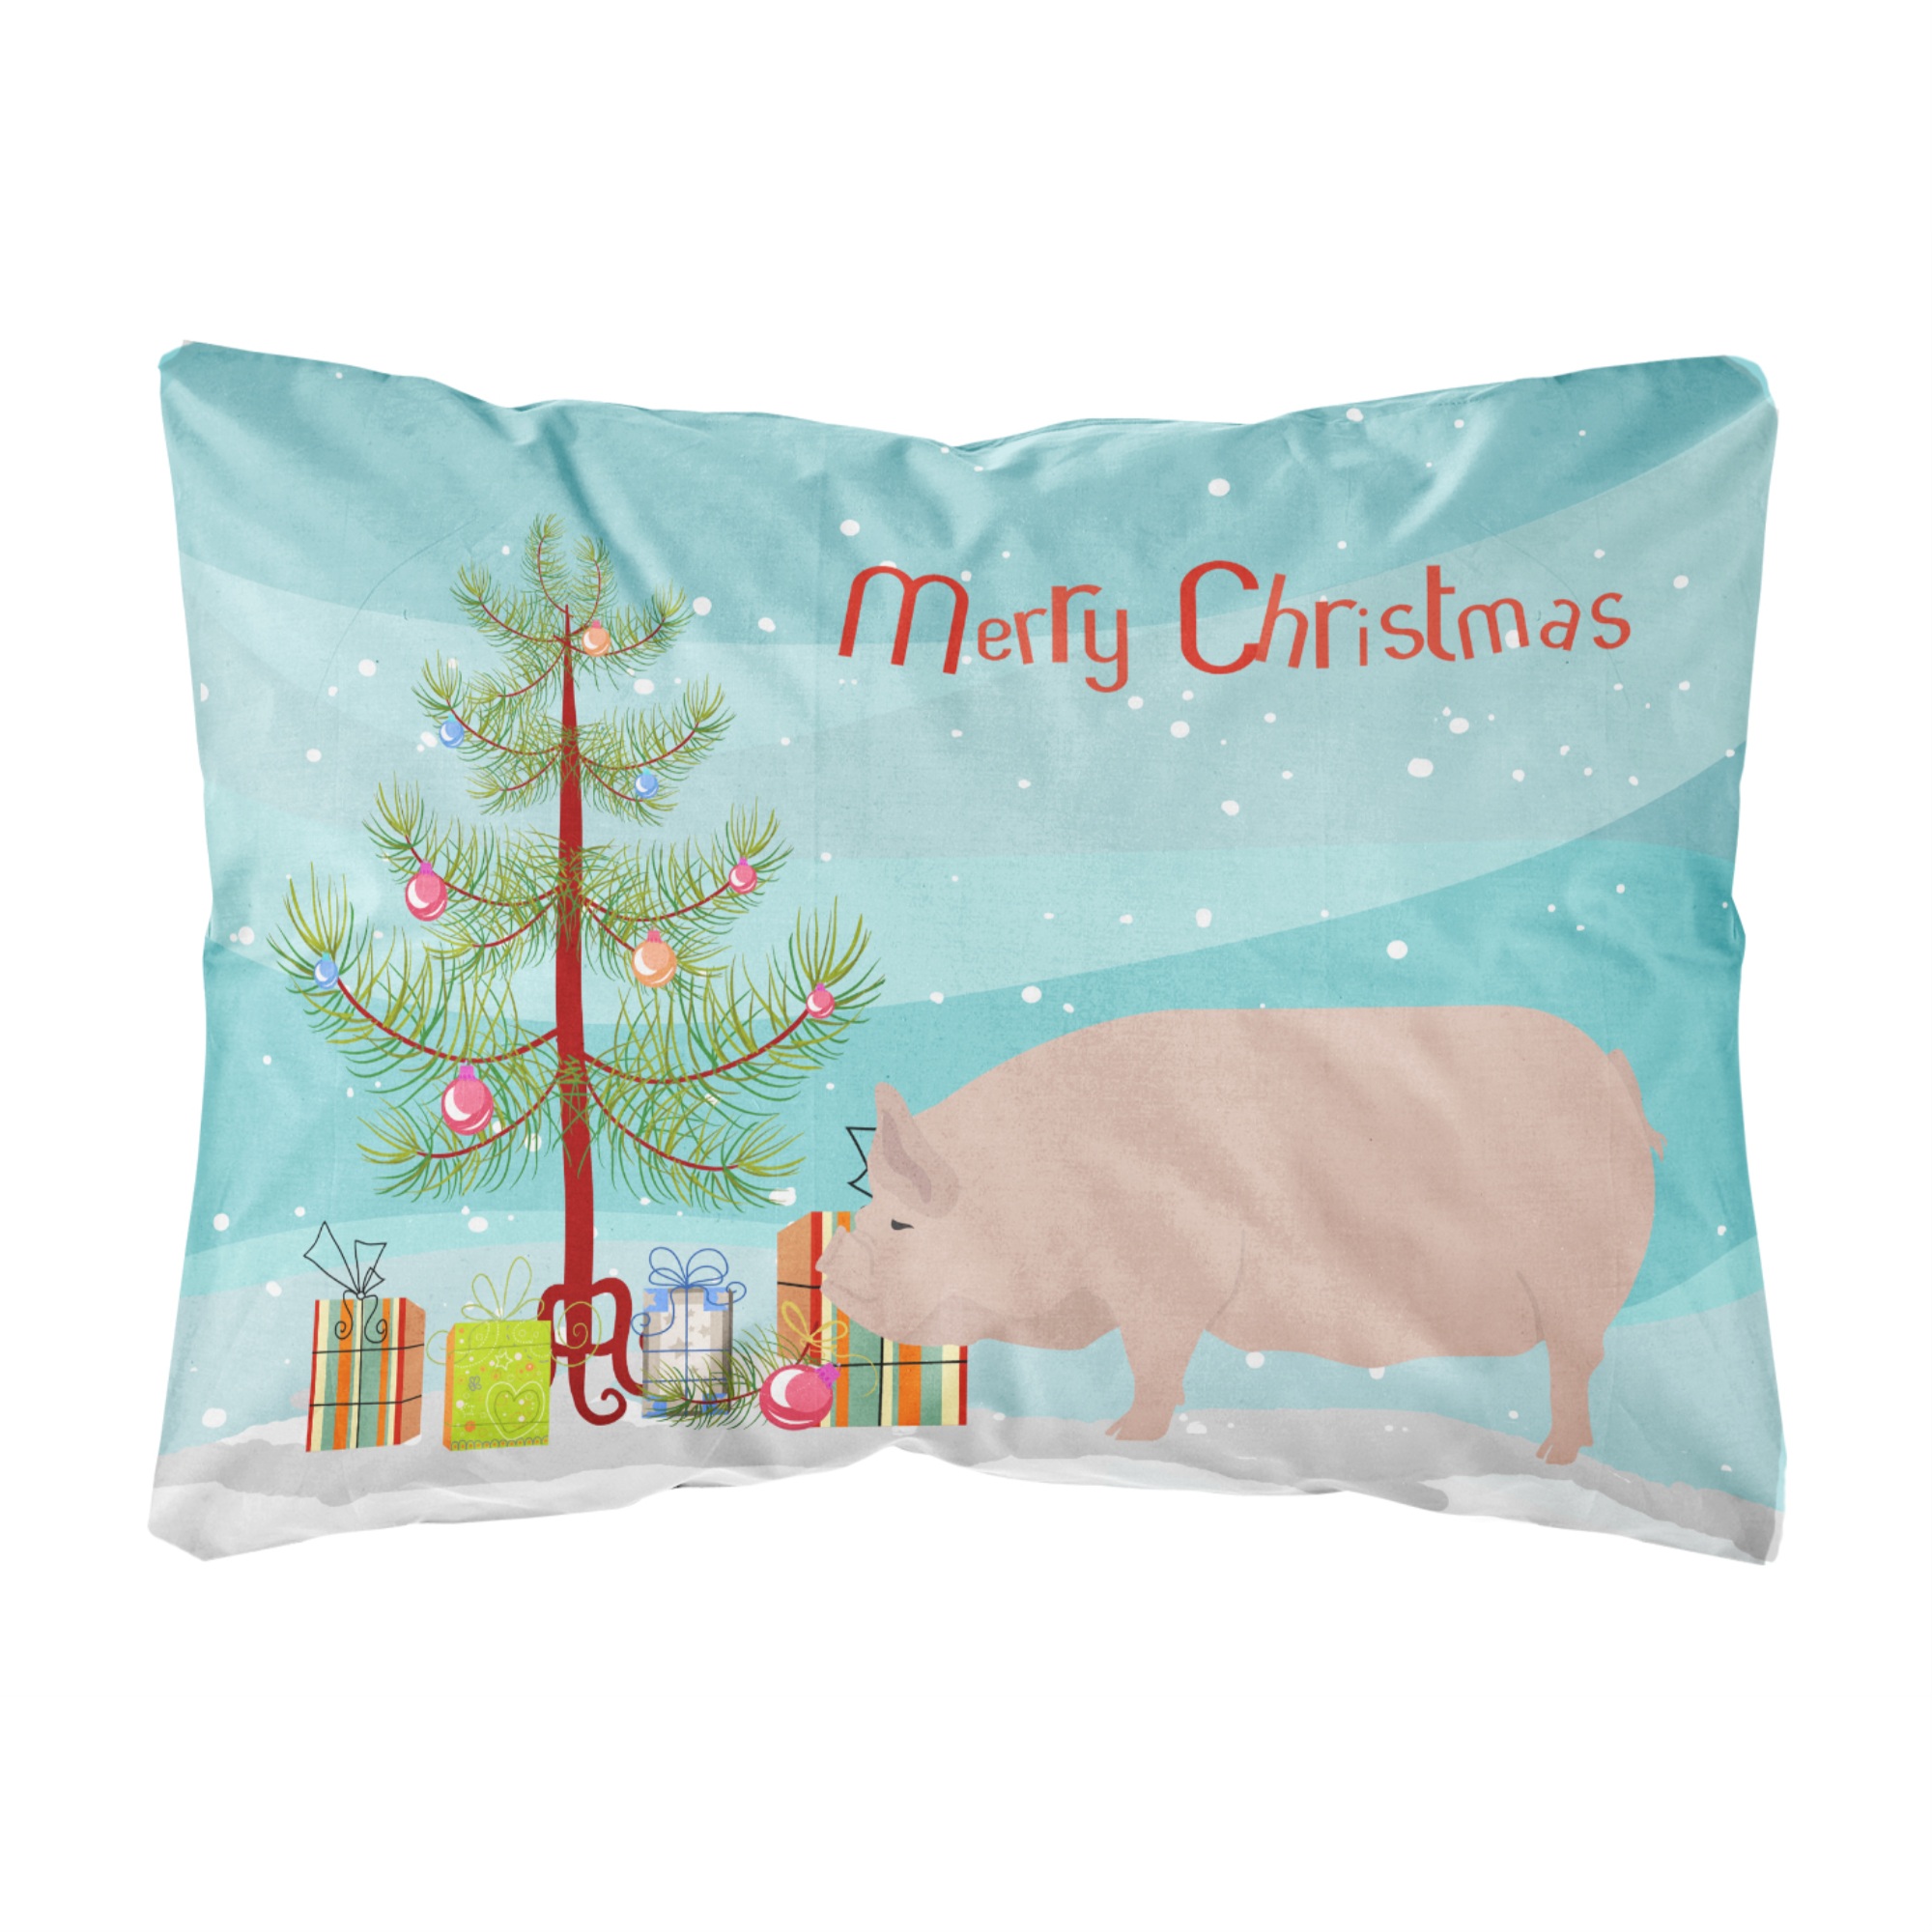 Caroline's Treasures BB9304PW1216 Welsh Pig Christmas Outdoor Canvas Pillow